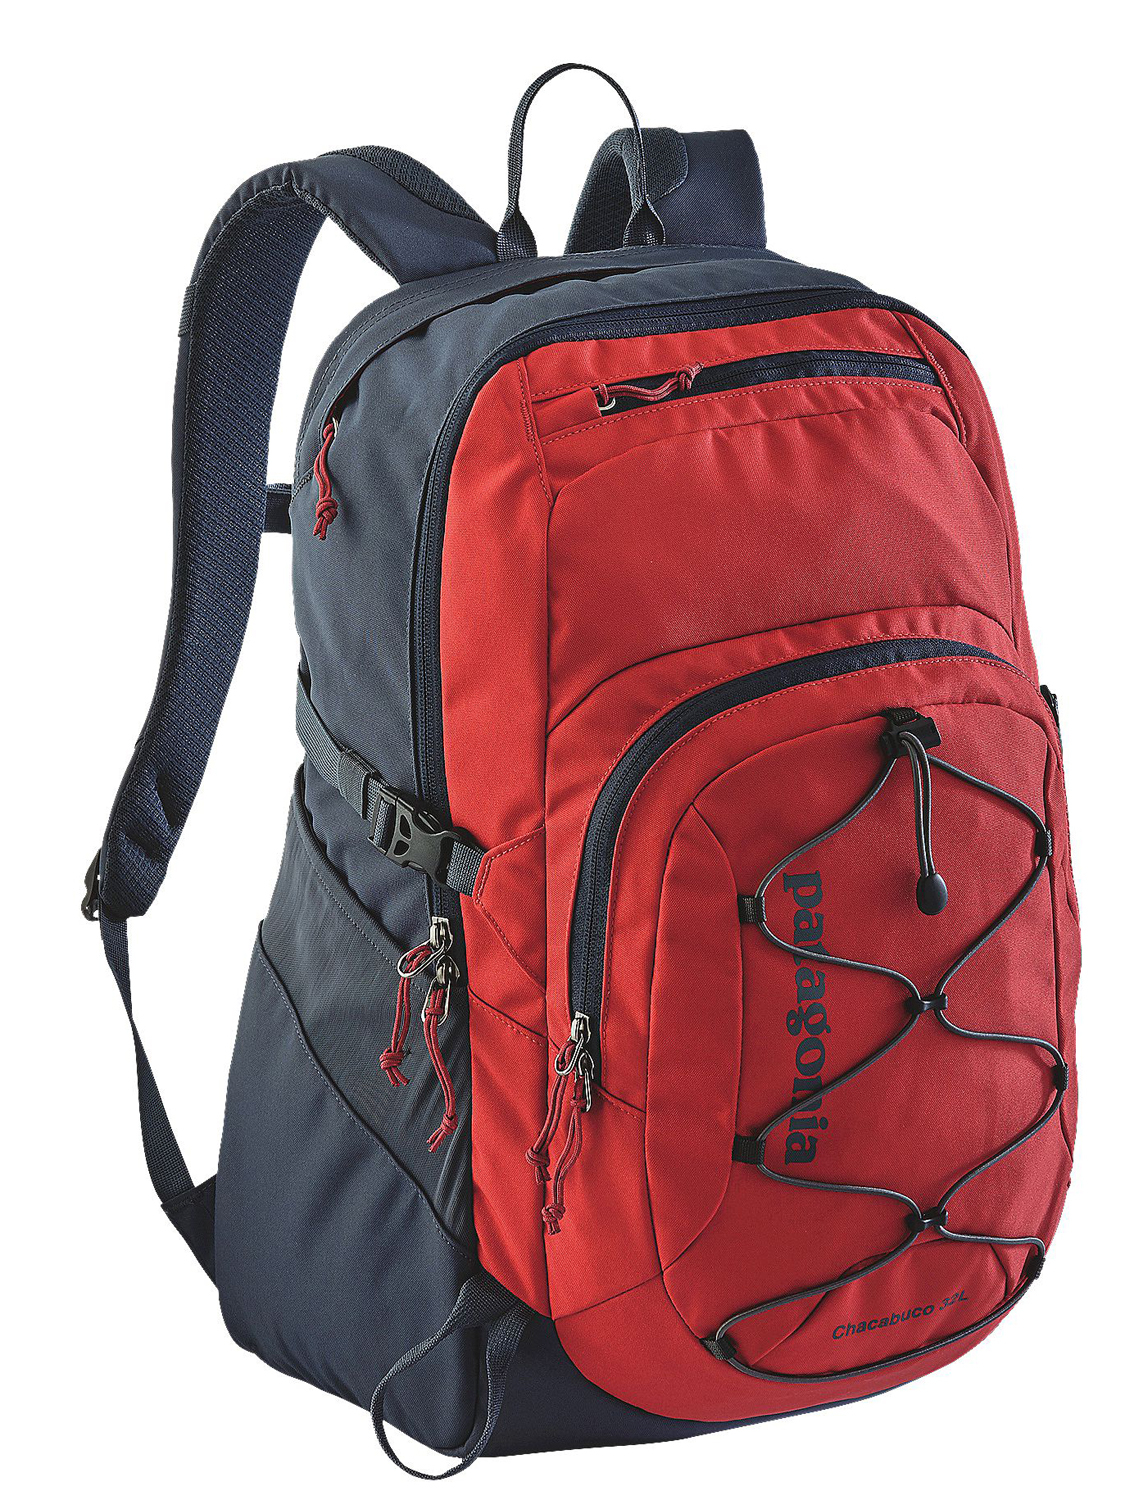 patagonia-ramble-red-chacabuco-backpack-32l-47926-rmbr